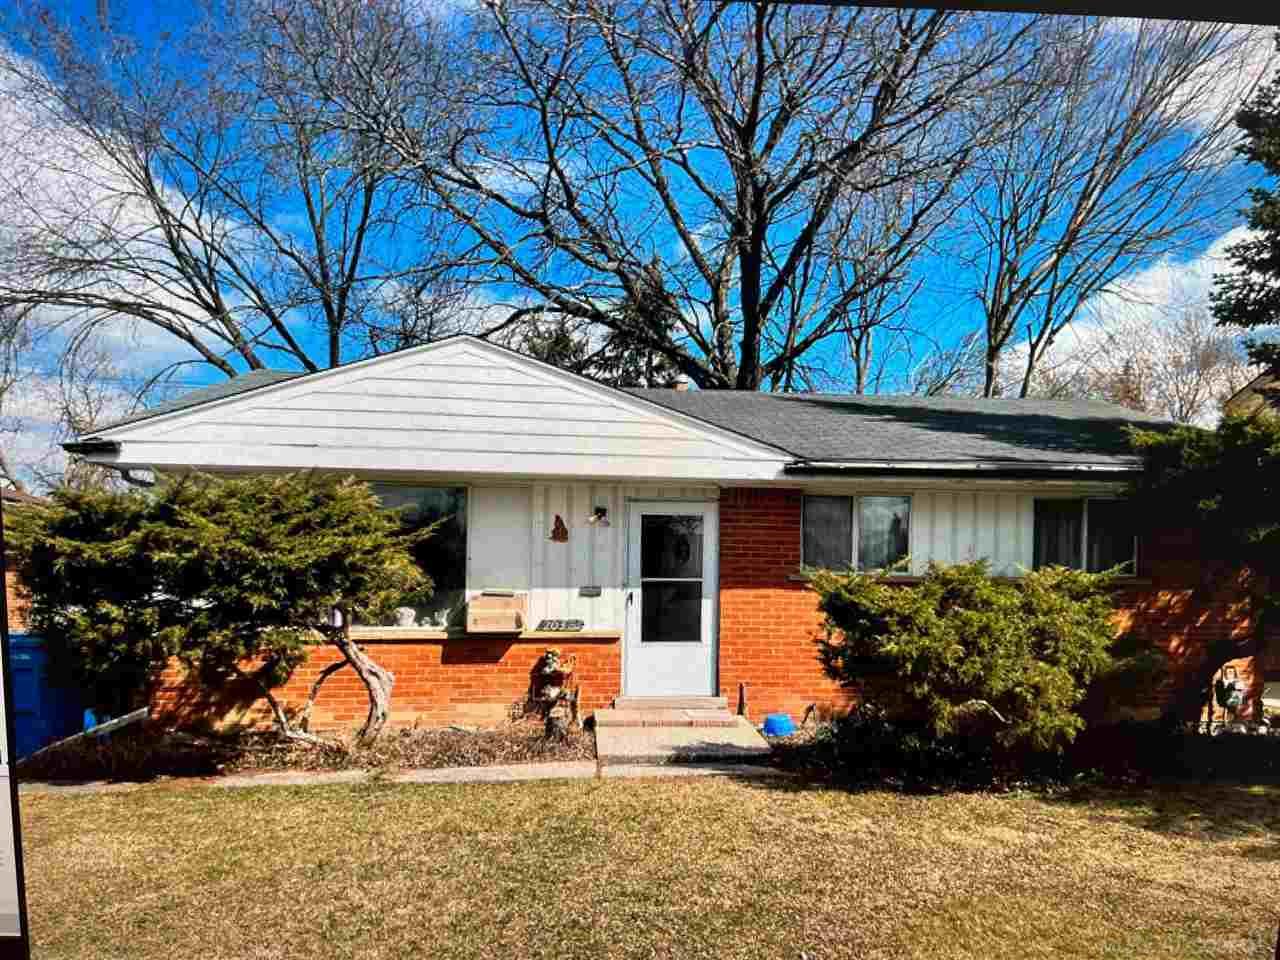 Call all investors!  Great potential flip in a great neighborhood.  Come make some money.   Also lots of potential for a handy homeowner.   Full basement and garage.  Inside needs TLC but is manageable.     Property sold as-is.  Buyer to assume city repairs if necessary.